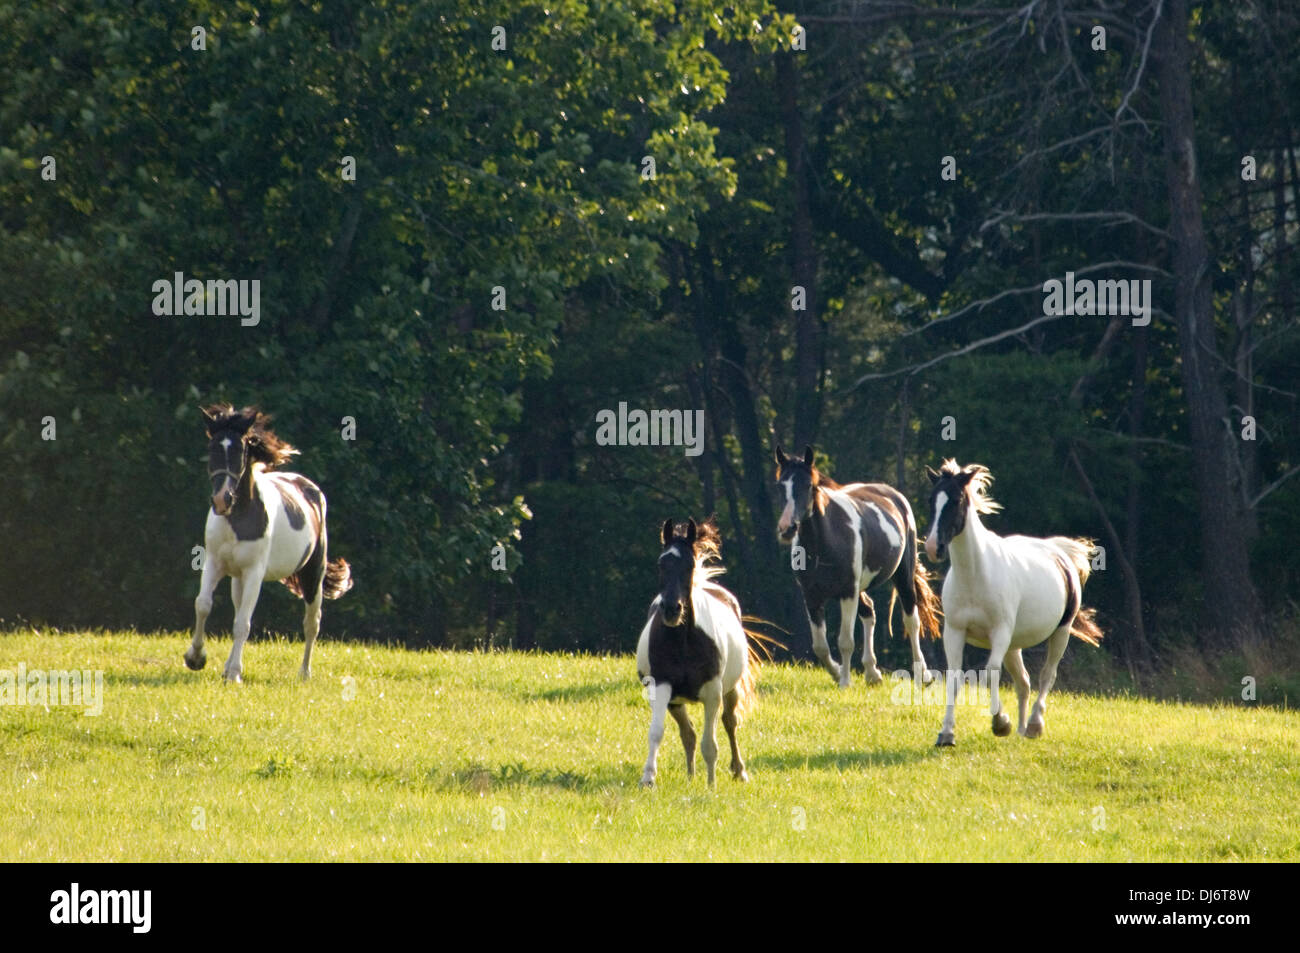 Four Horses Galloping in Pasture in Hart County, Kentucky Stock Photo